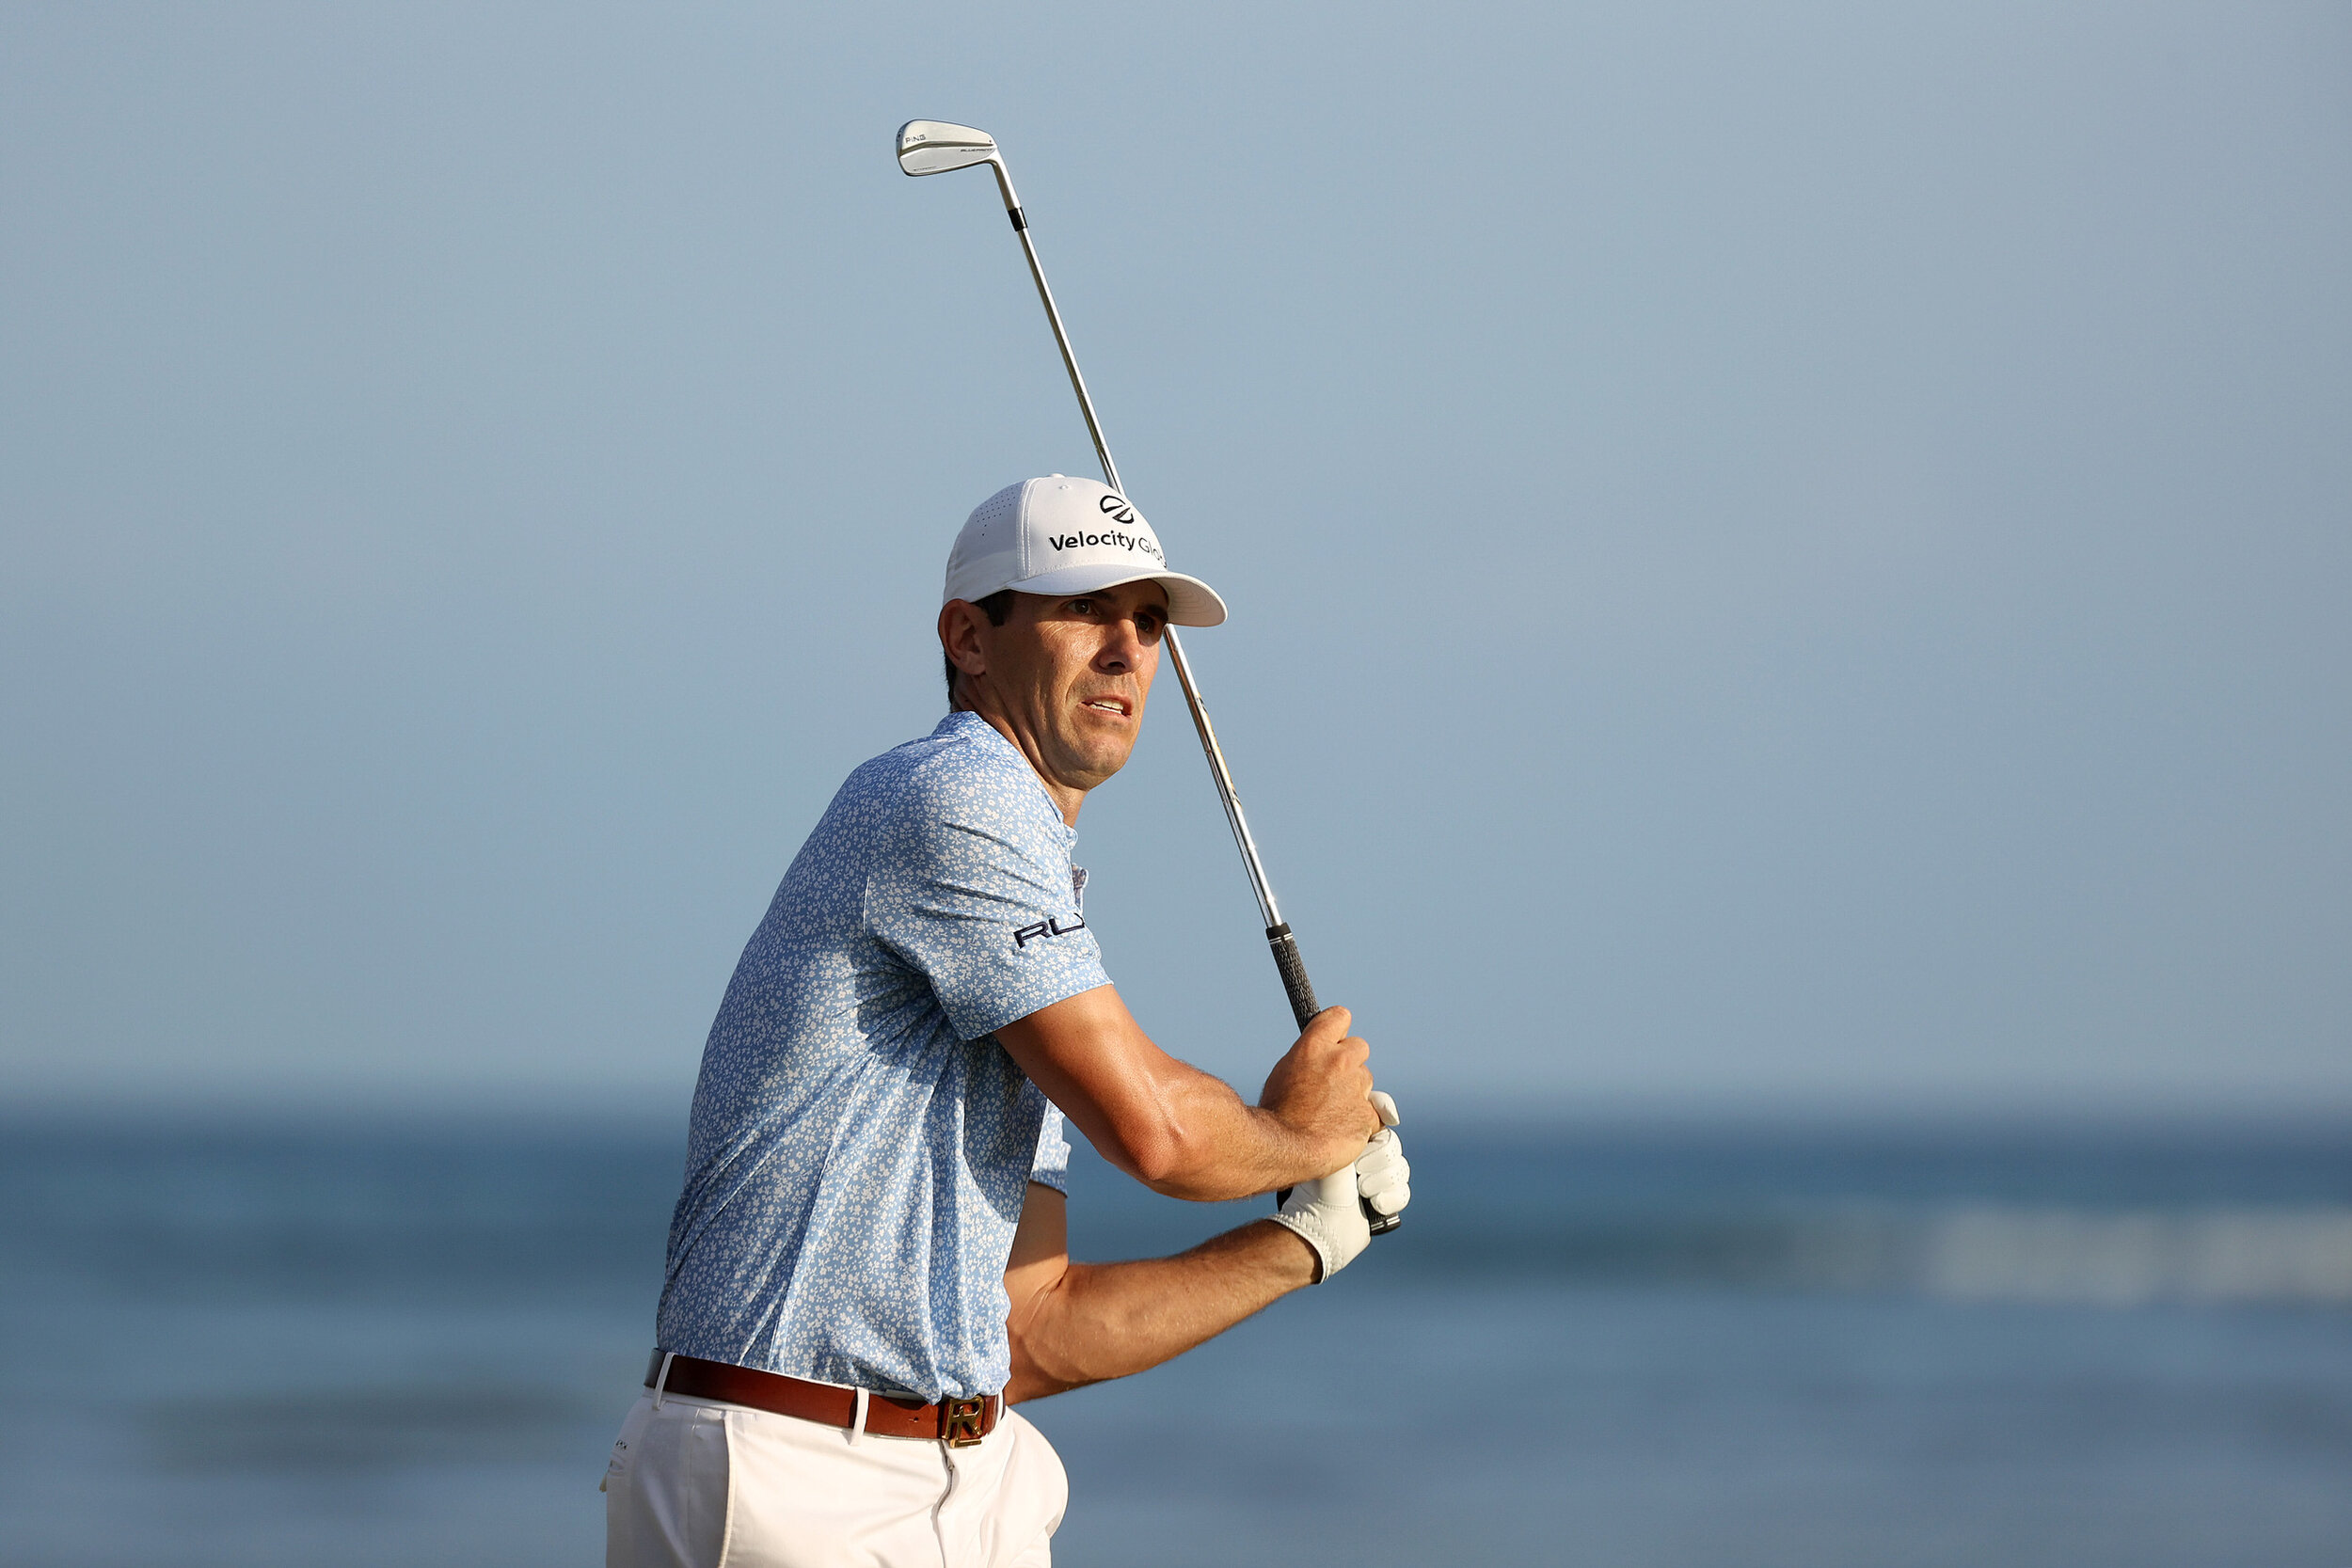  HONOLULU, HAWAII - JANUARY 15: Billy Horschel of the United States reacts after hitting his shot from the 17th tee during the second round of the Sony Open in Hawaii at the Waialae Country Club on January 15, 2021 in Honolulu, Hawaii. (Photo by Greg